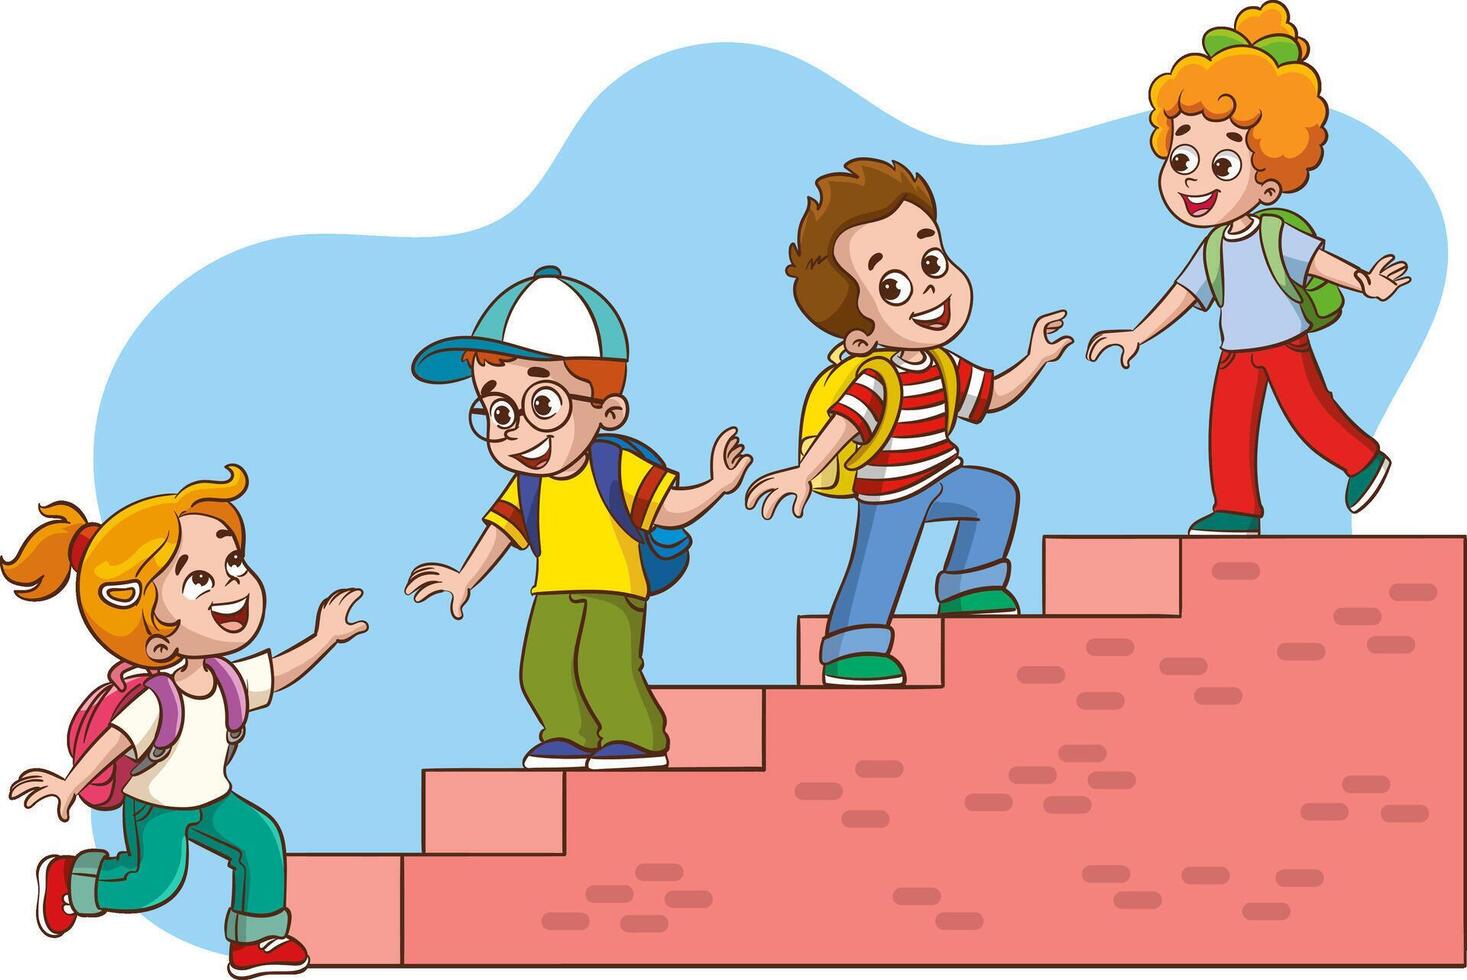 Cute children climb the stairs of success by working as a teamwork partnership vector